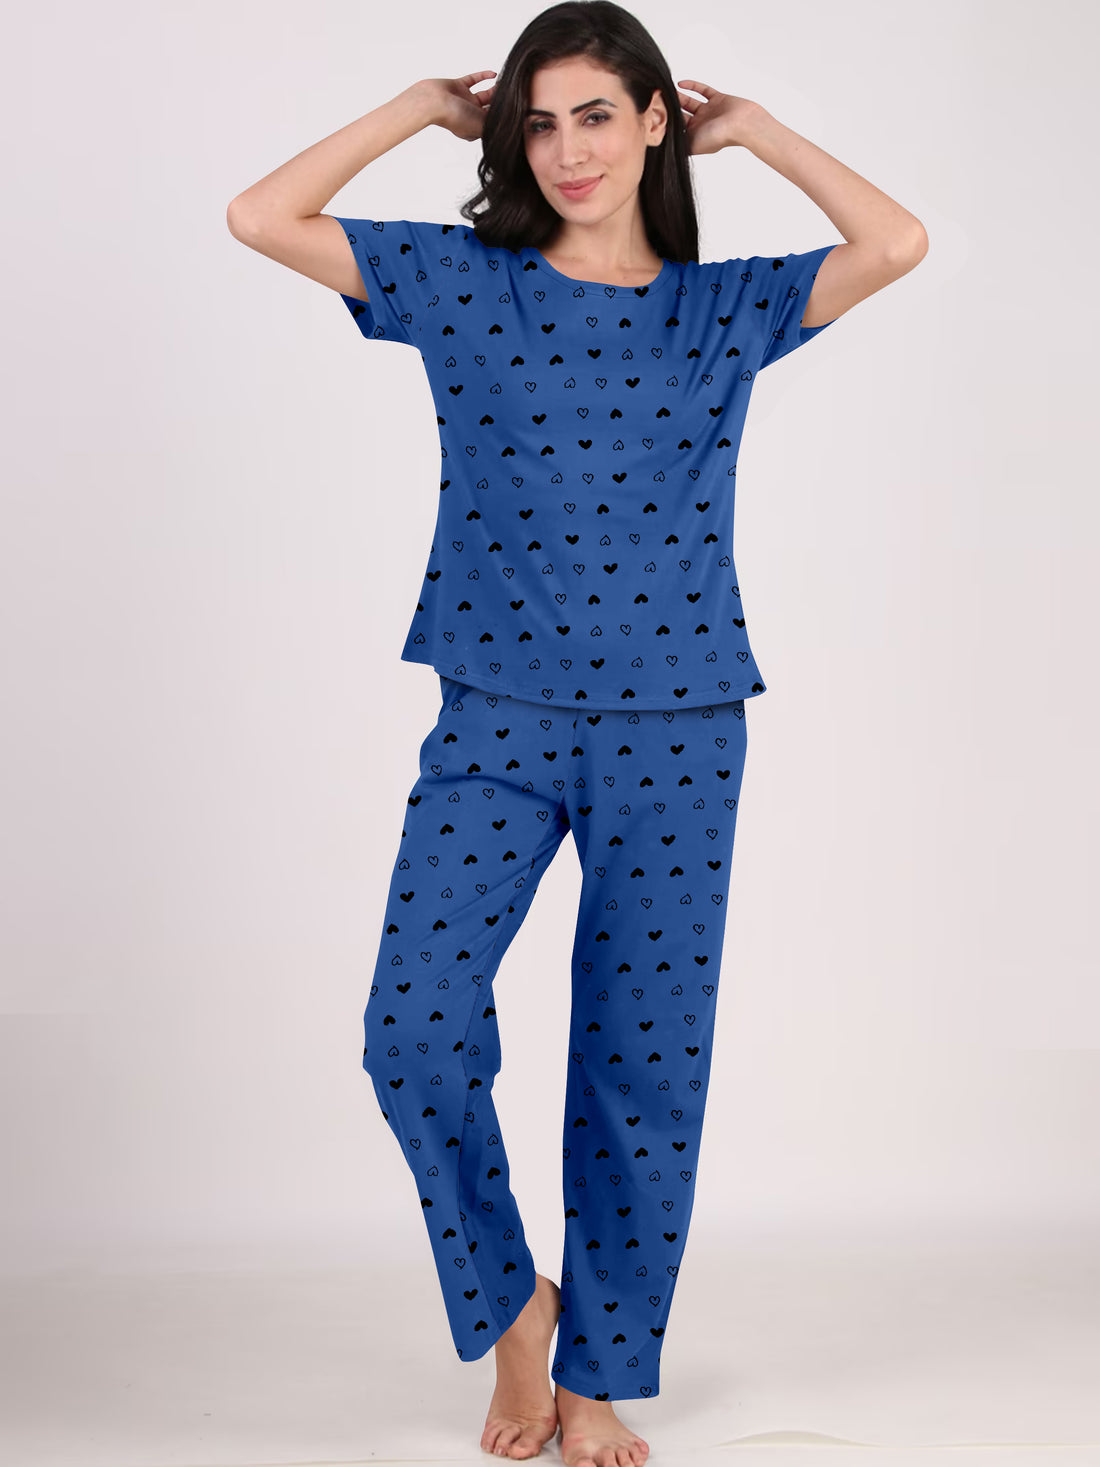 Women's And Girl's Cotton Heart Printed Blue Night Suit Set of T-Shirt & Pyjama.